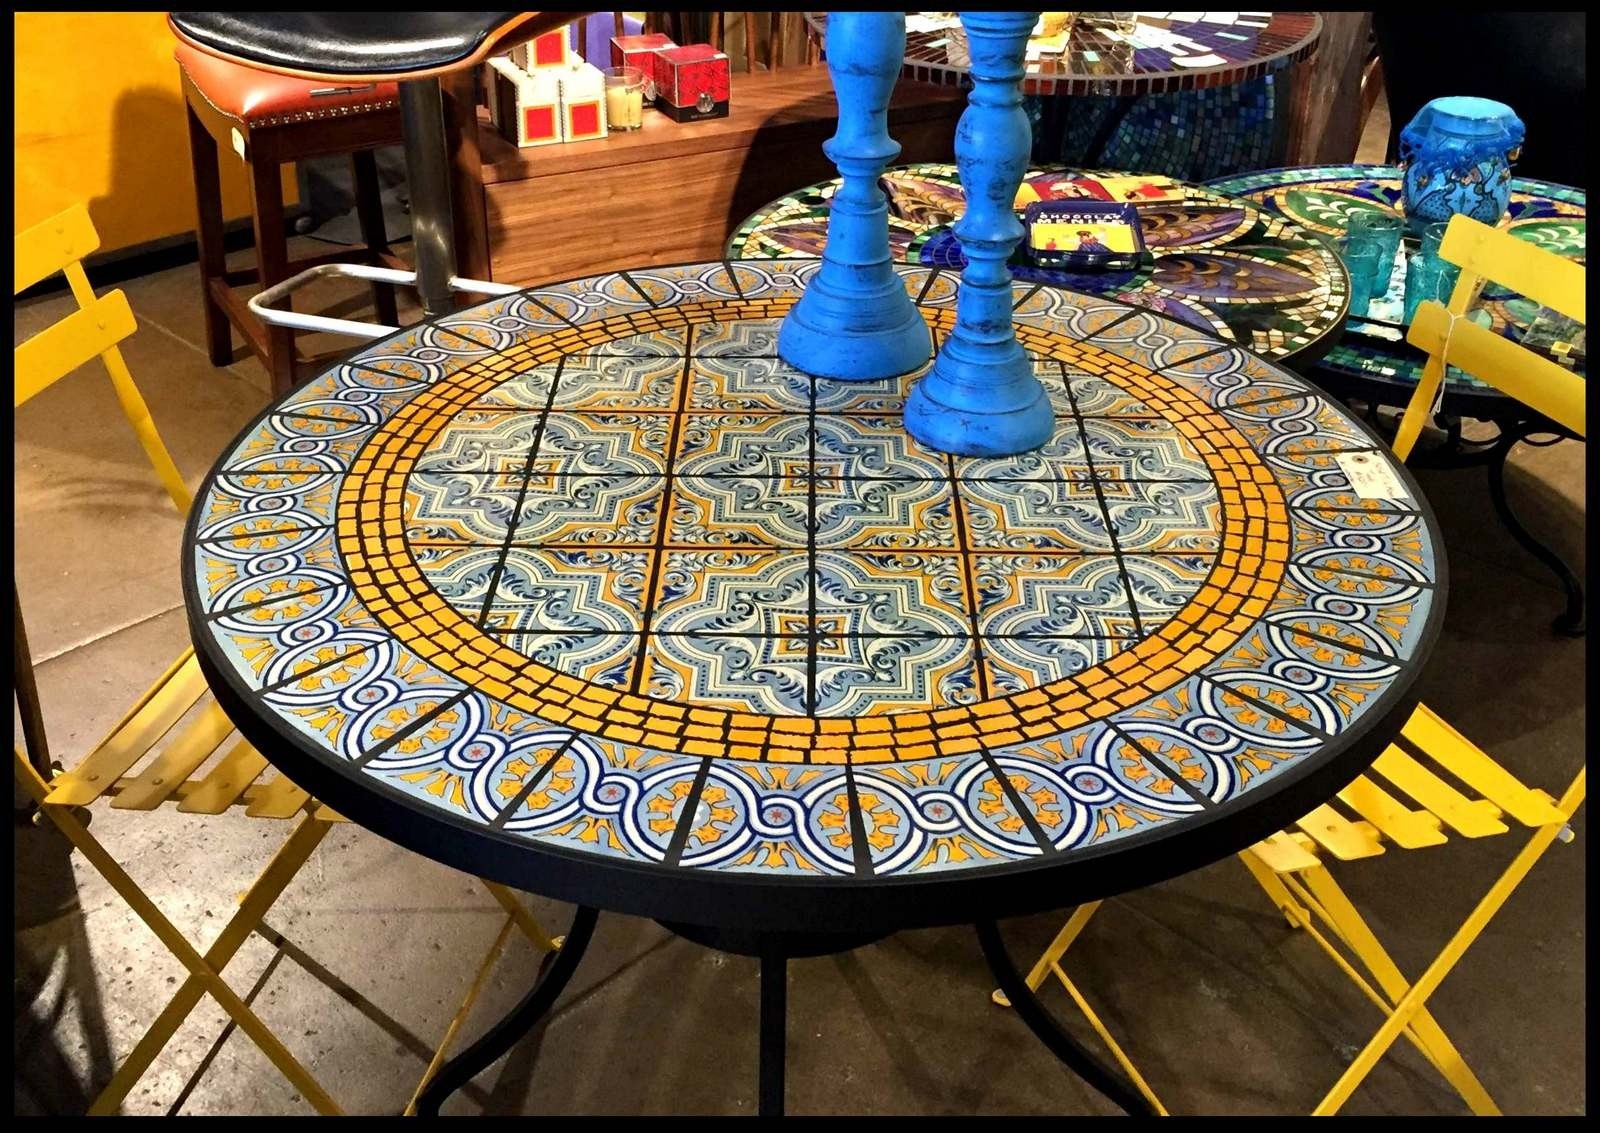 Tile and glass mosaic tables